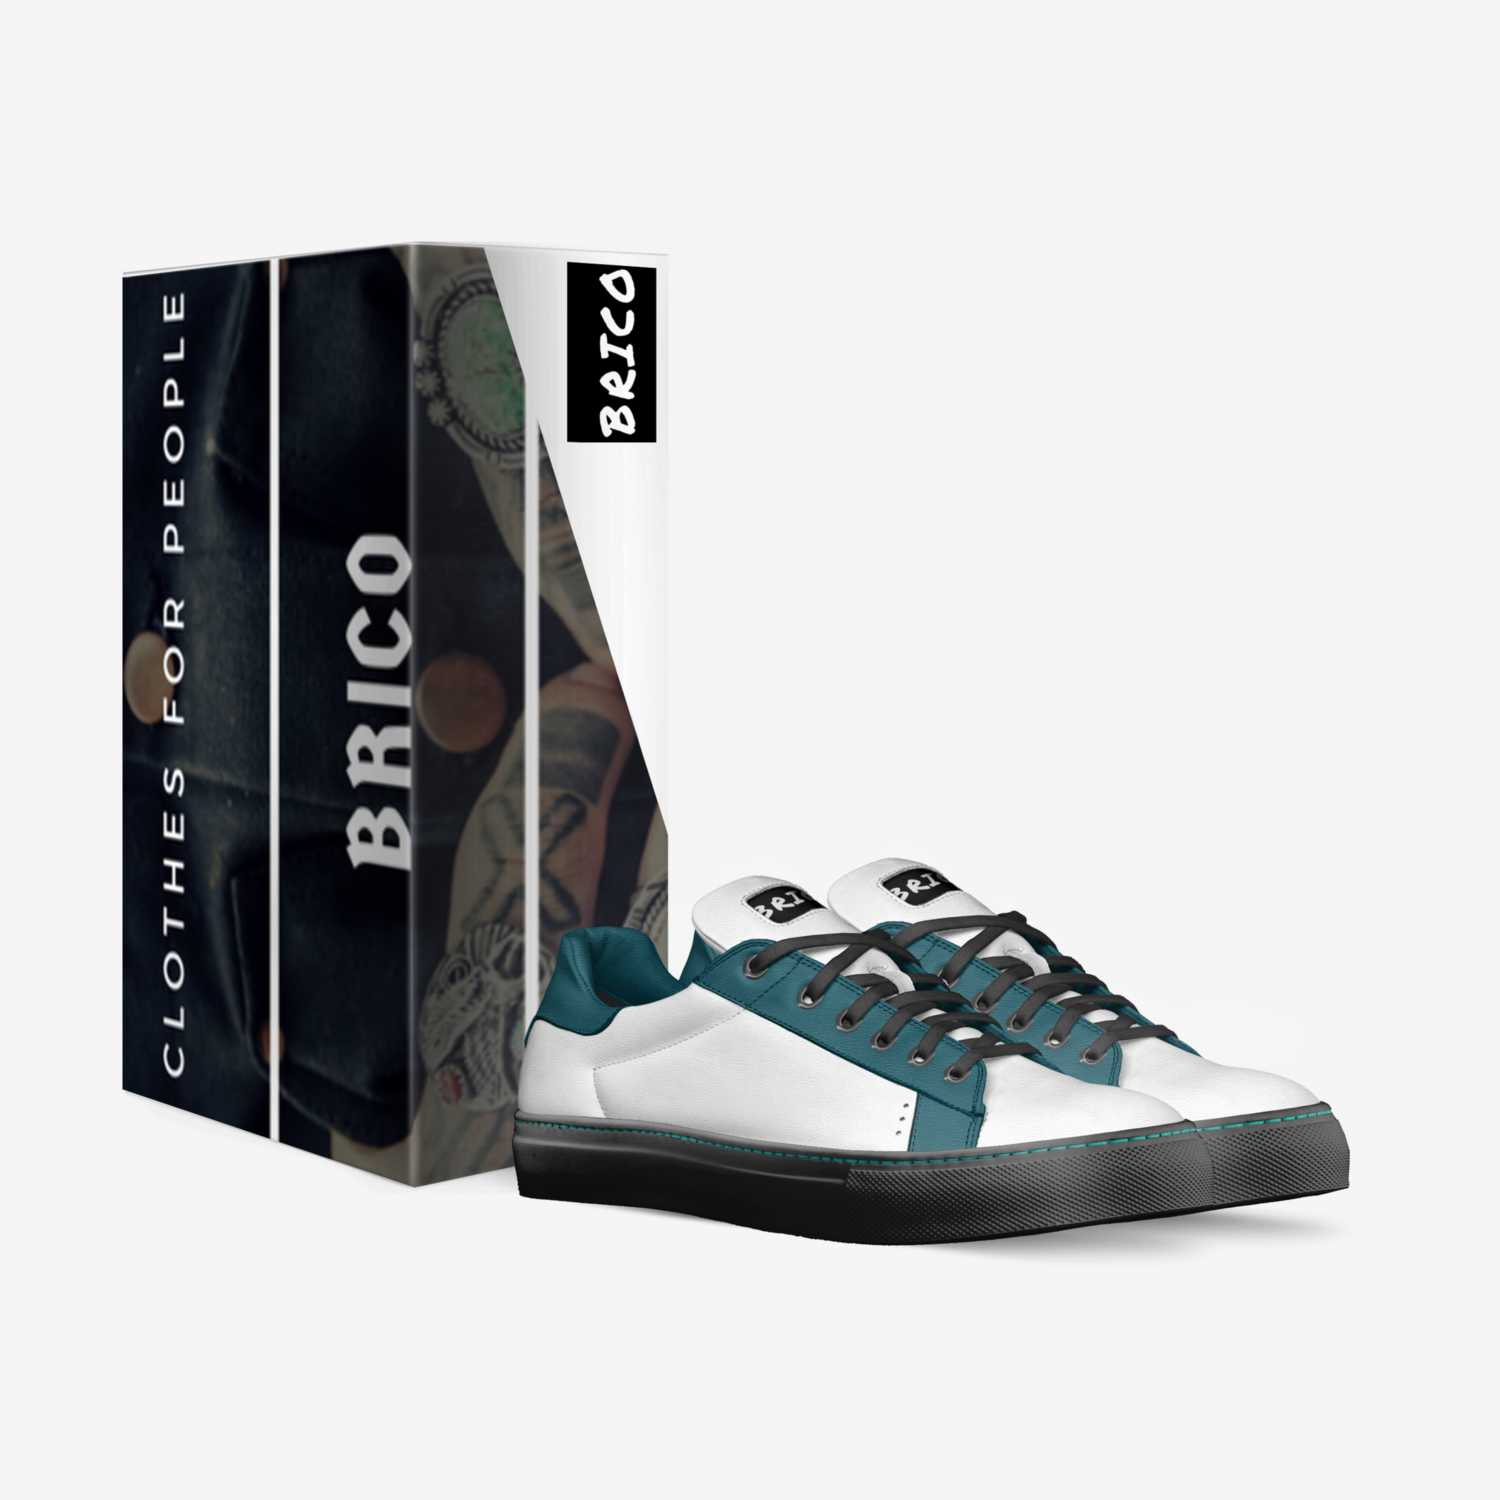 BRICO custom made in Italy shoes by Fab War | Box view